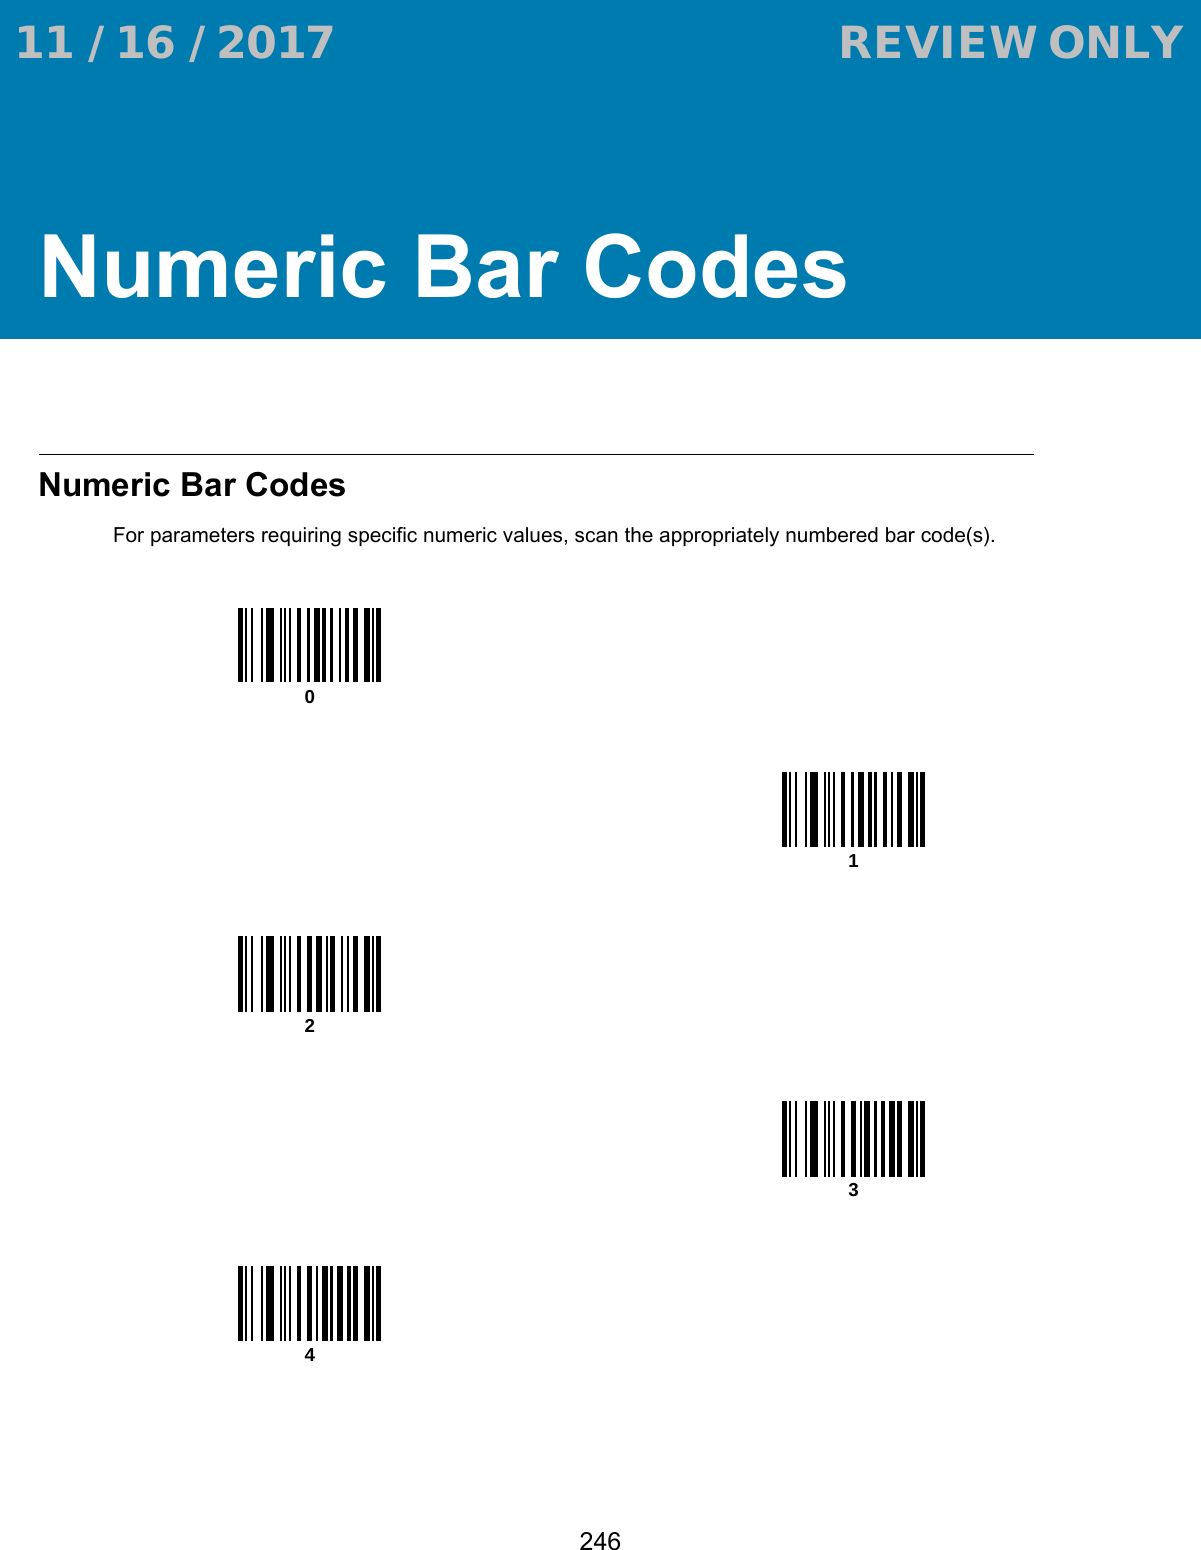 246Numeric Bar CodesNumeric Bar CodesFor parameters requiring specific numeric values, scan the appropriately numbered bar code(s).01234 11 / 16 / 2017                                  REVIEW ONLY                             REVIEW ONLY - REVIEW ONLY - REVIEW ONLY